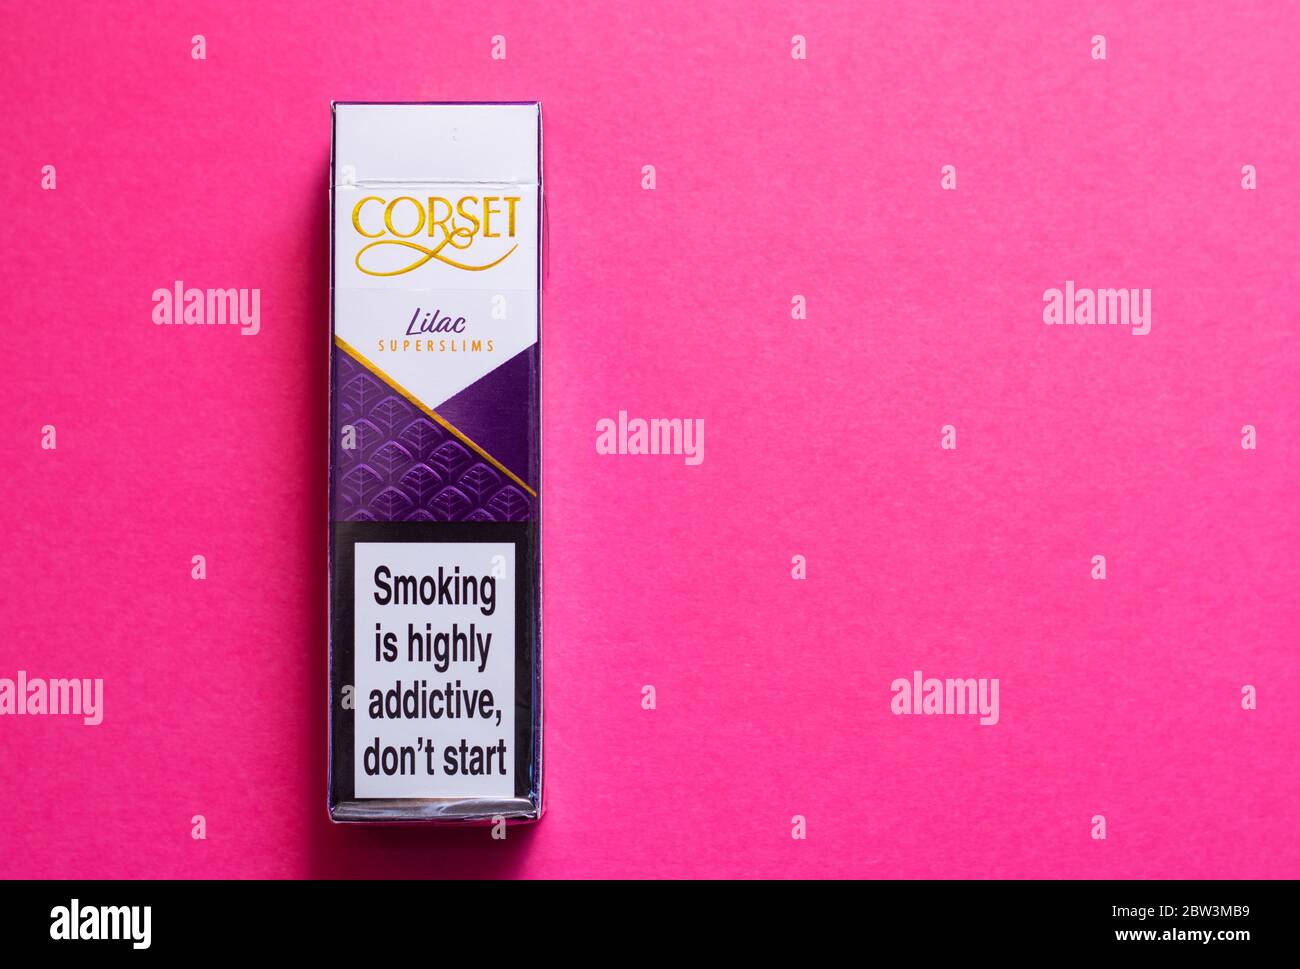 Box of Corset superslim cigarettes on a pink background Stock Photo - Alamy